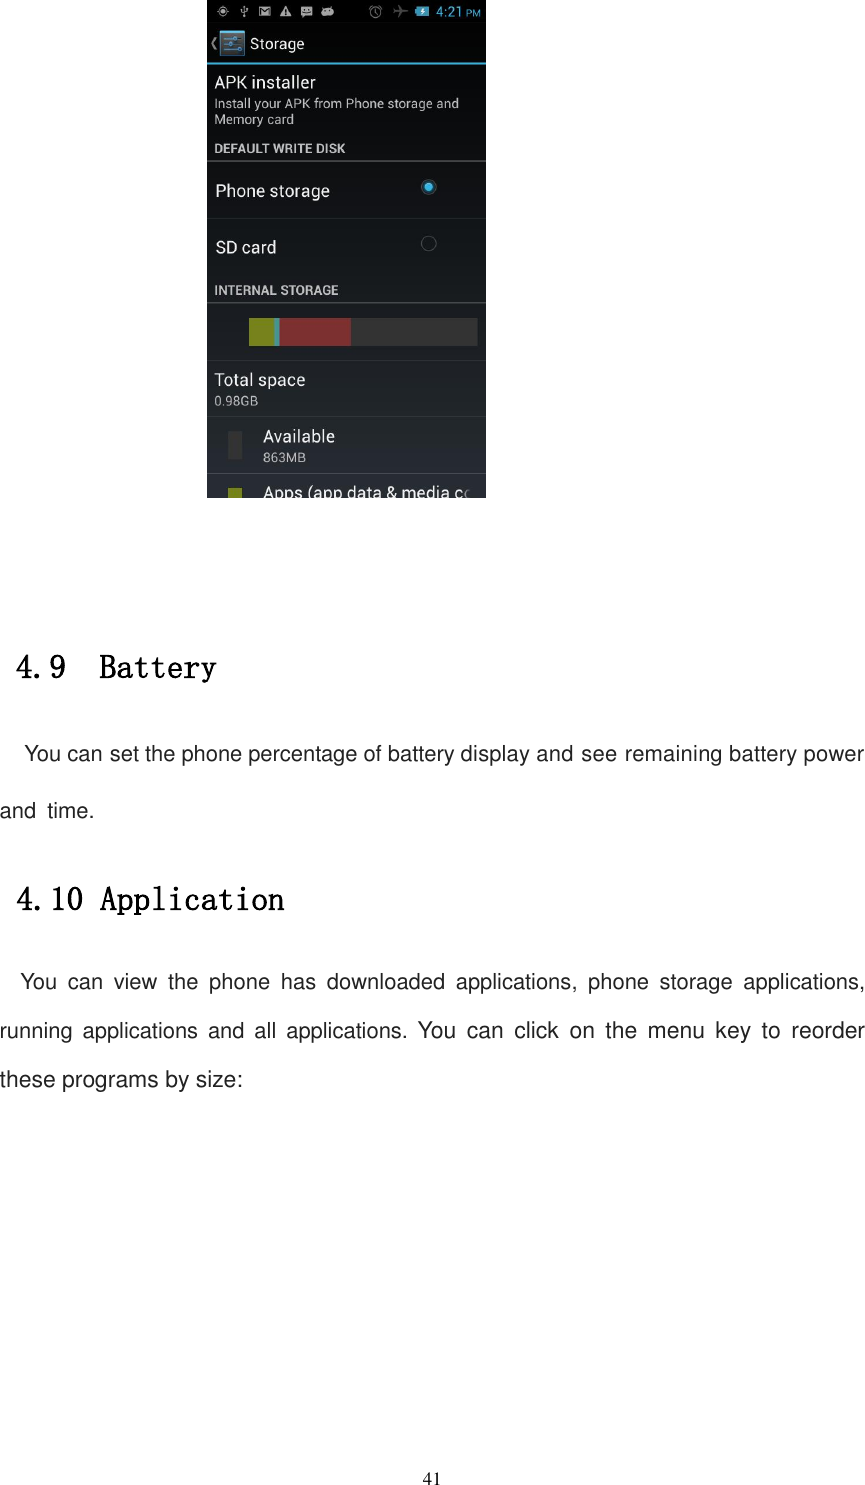   41    4.9  Battery  You can set the phone percentage of battery display and see remaining battery power and time.  4.10 Application You  can  view  the  phone  has  downloaded  applications,  phone  storage  applications, running  applications  and  all  applications.  You  can  click  on  the  menu  key  to  reorder these programs by size: 